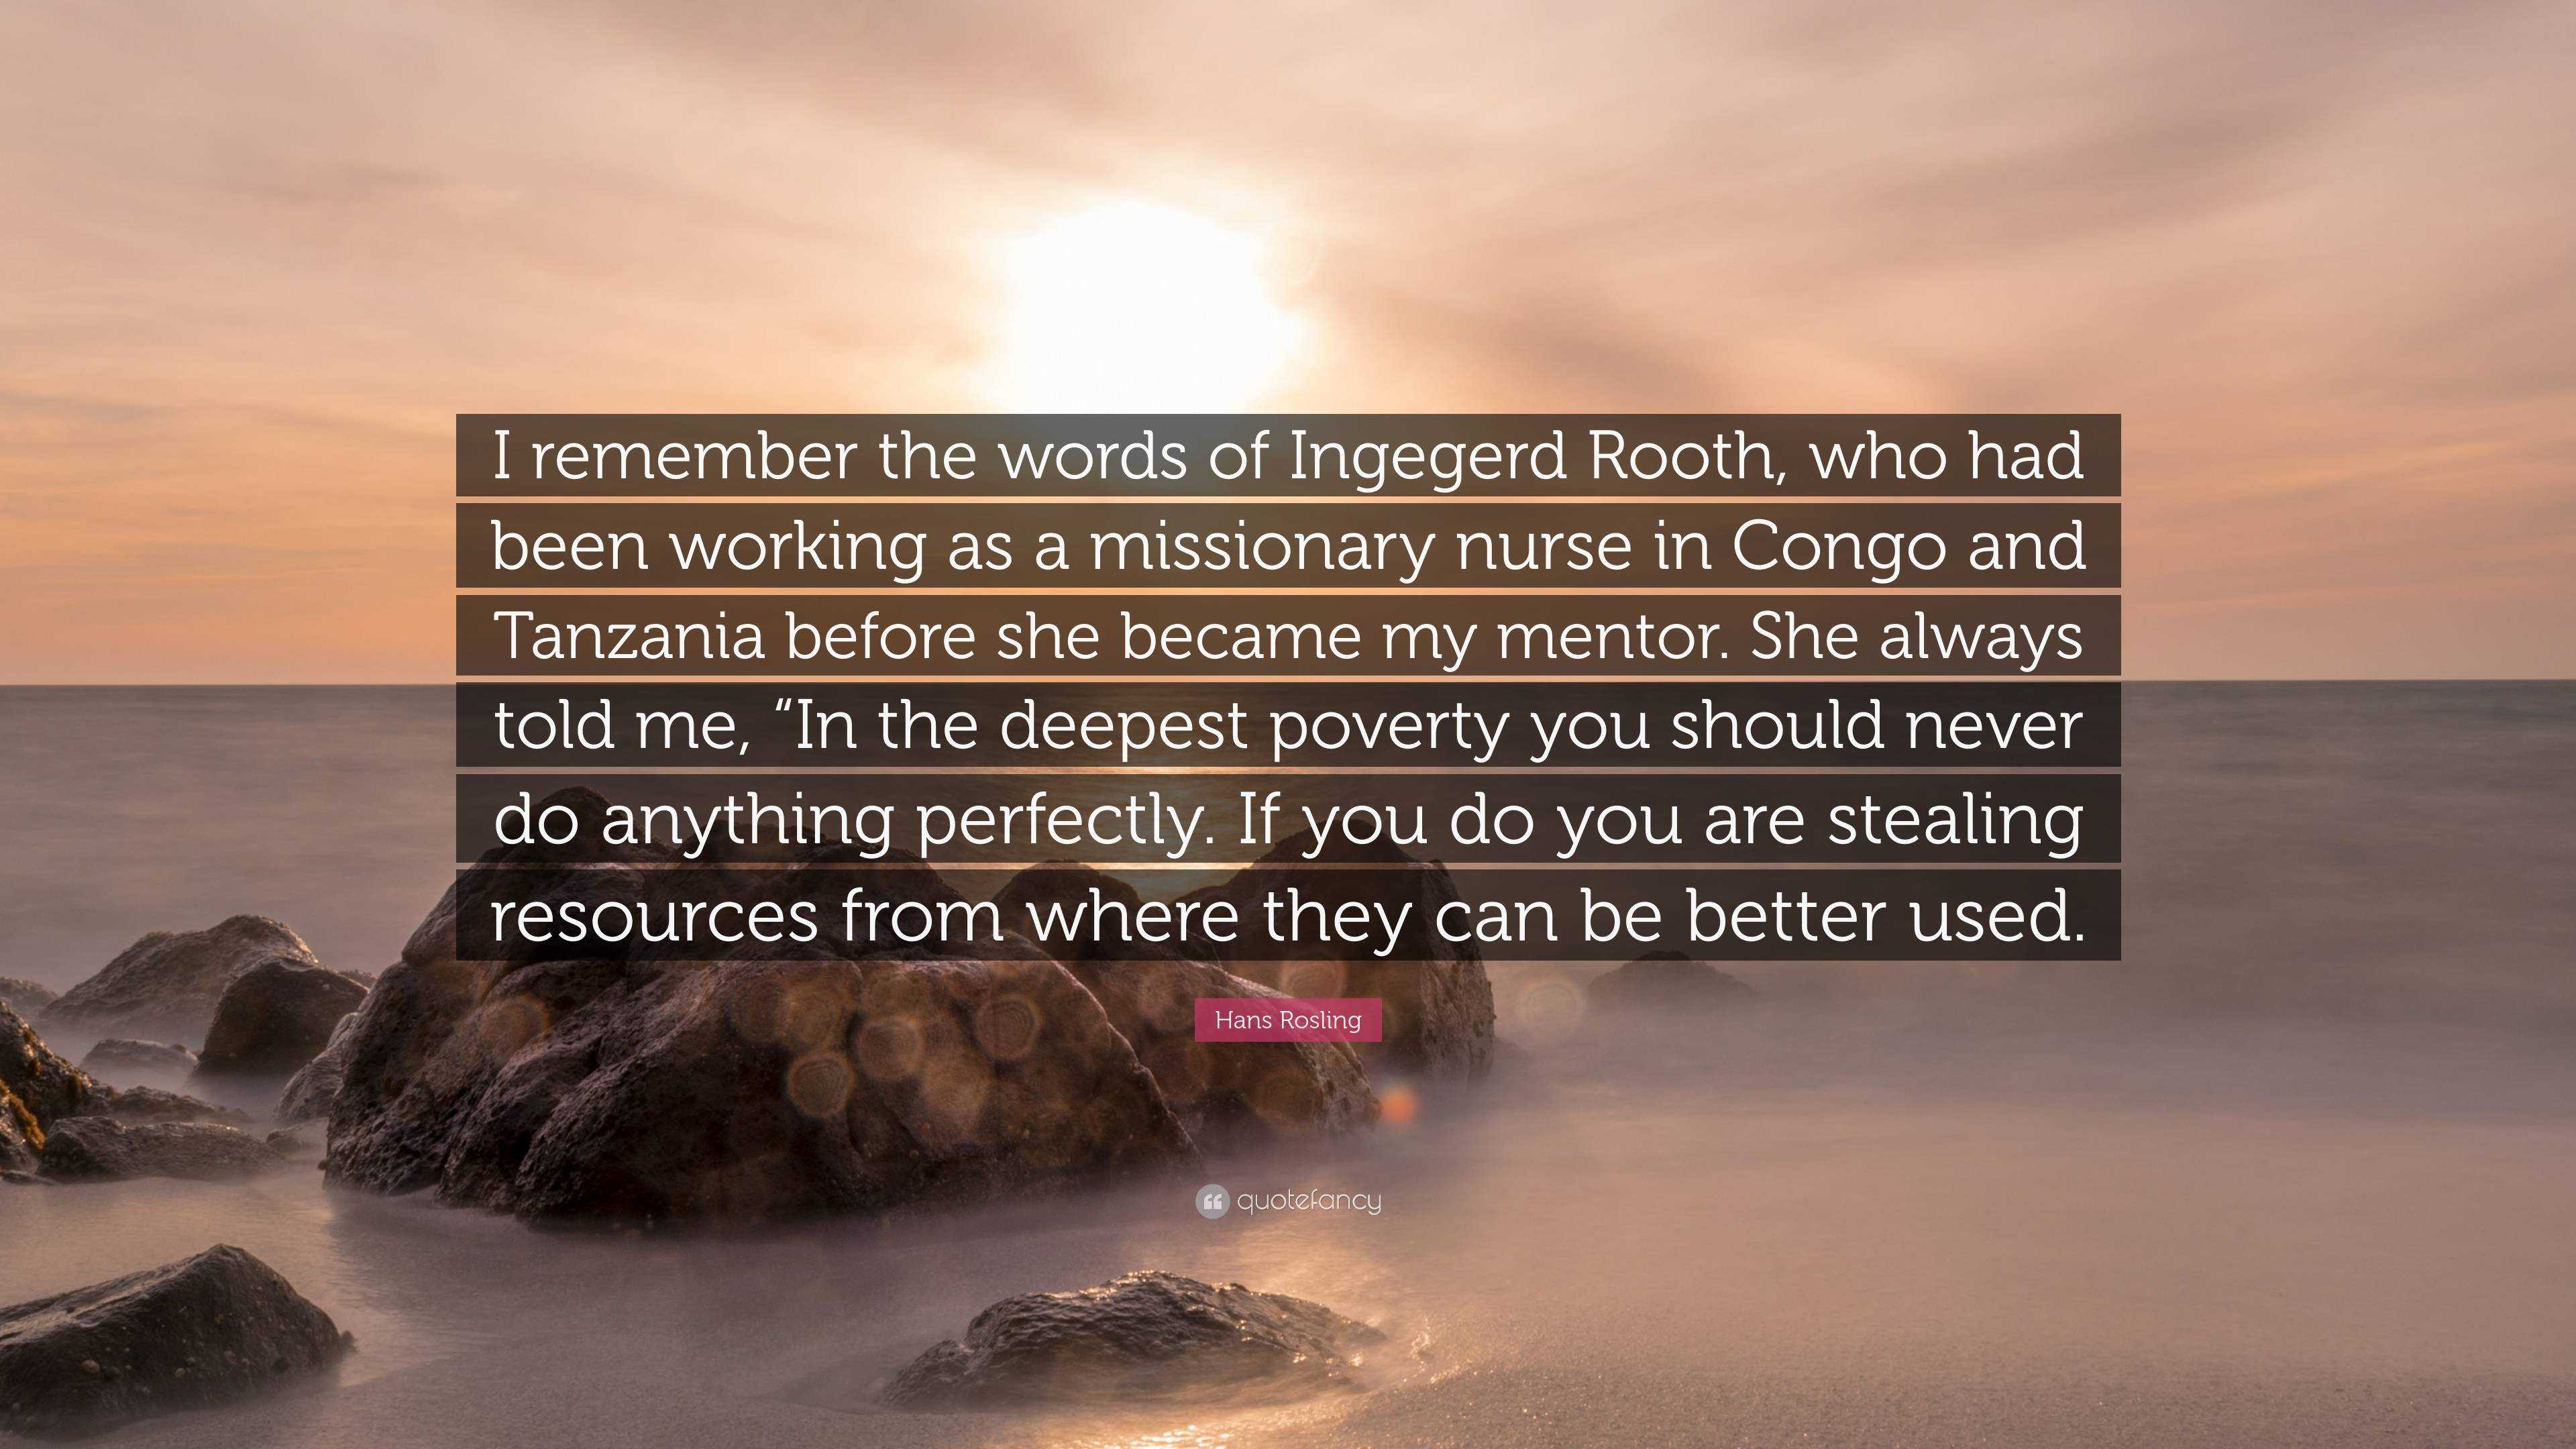 Hans Rosling Quote: “I remember the words of Ingegerd Rooth, who had been working as a missionary in Congo and Tanzania before she beca...”